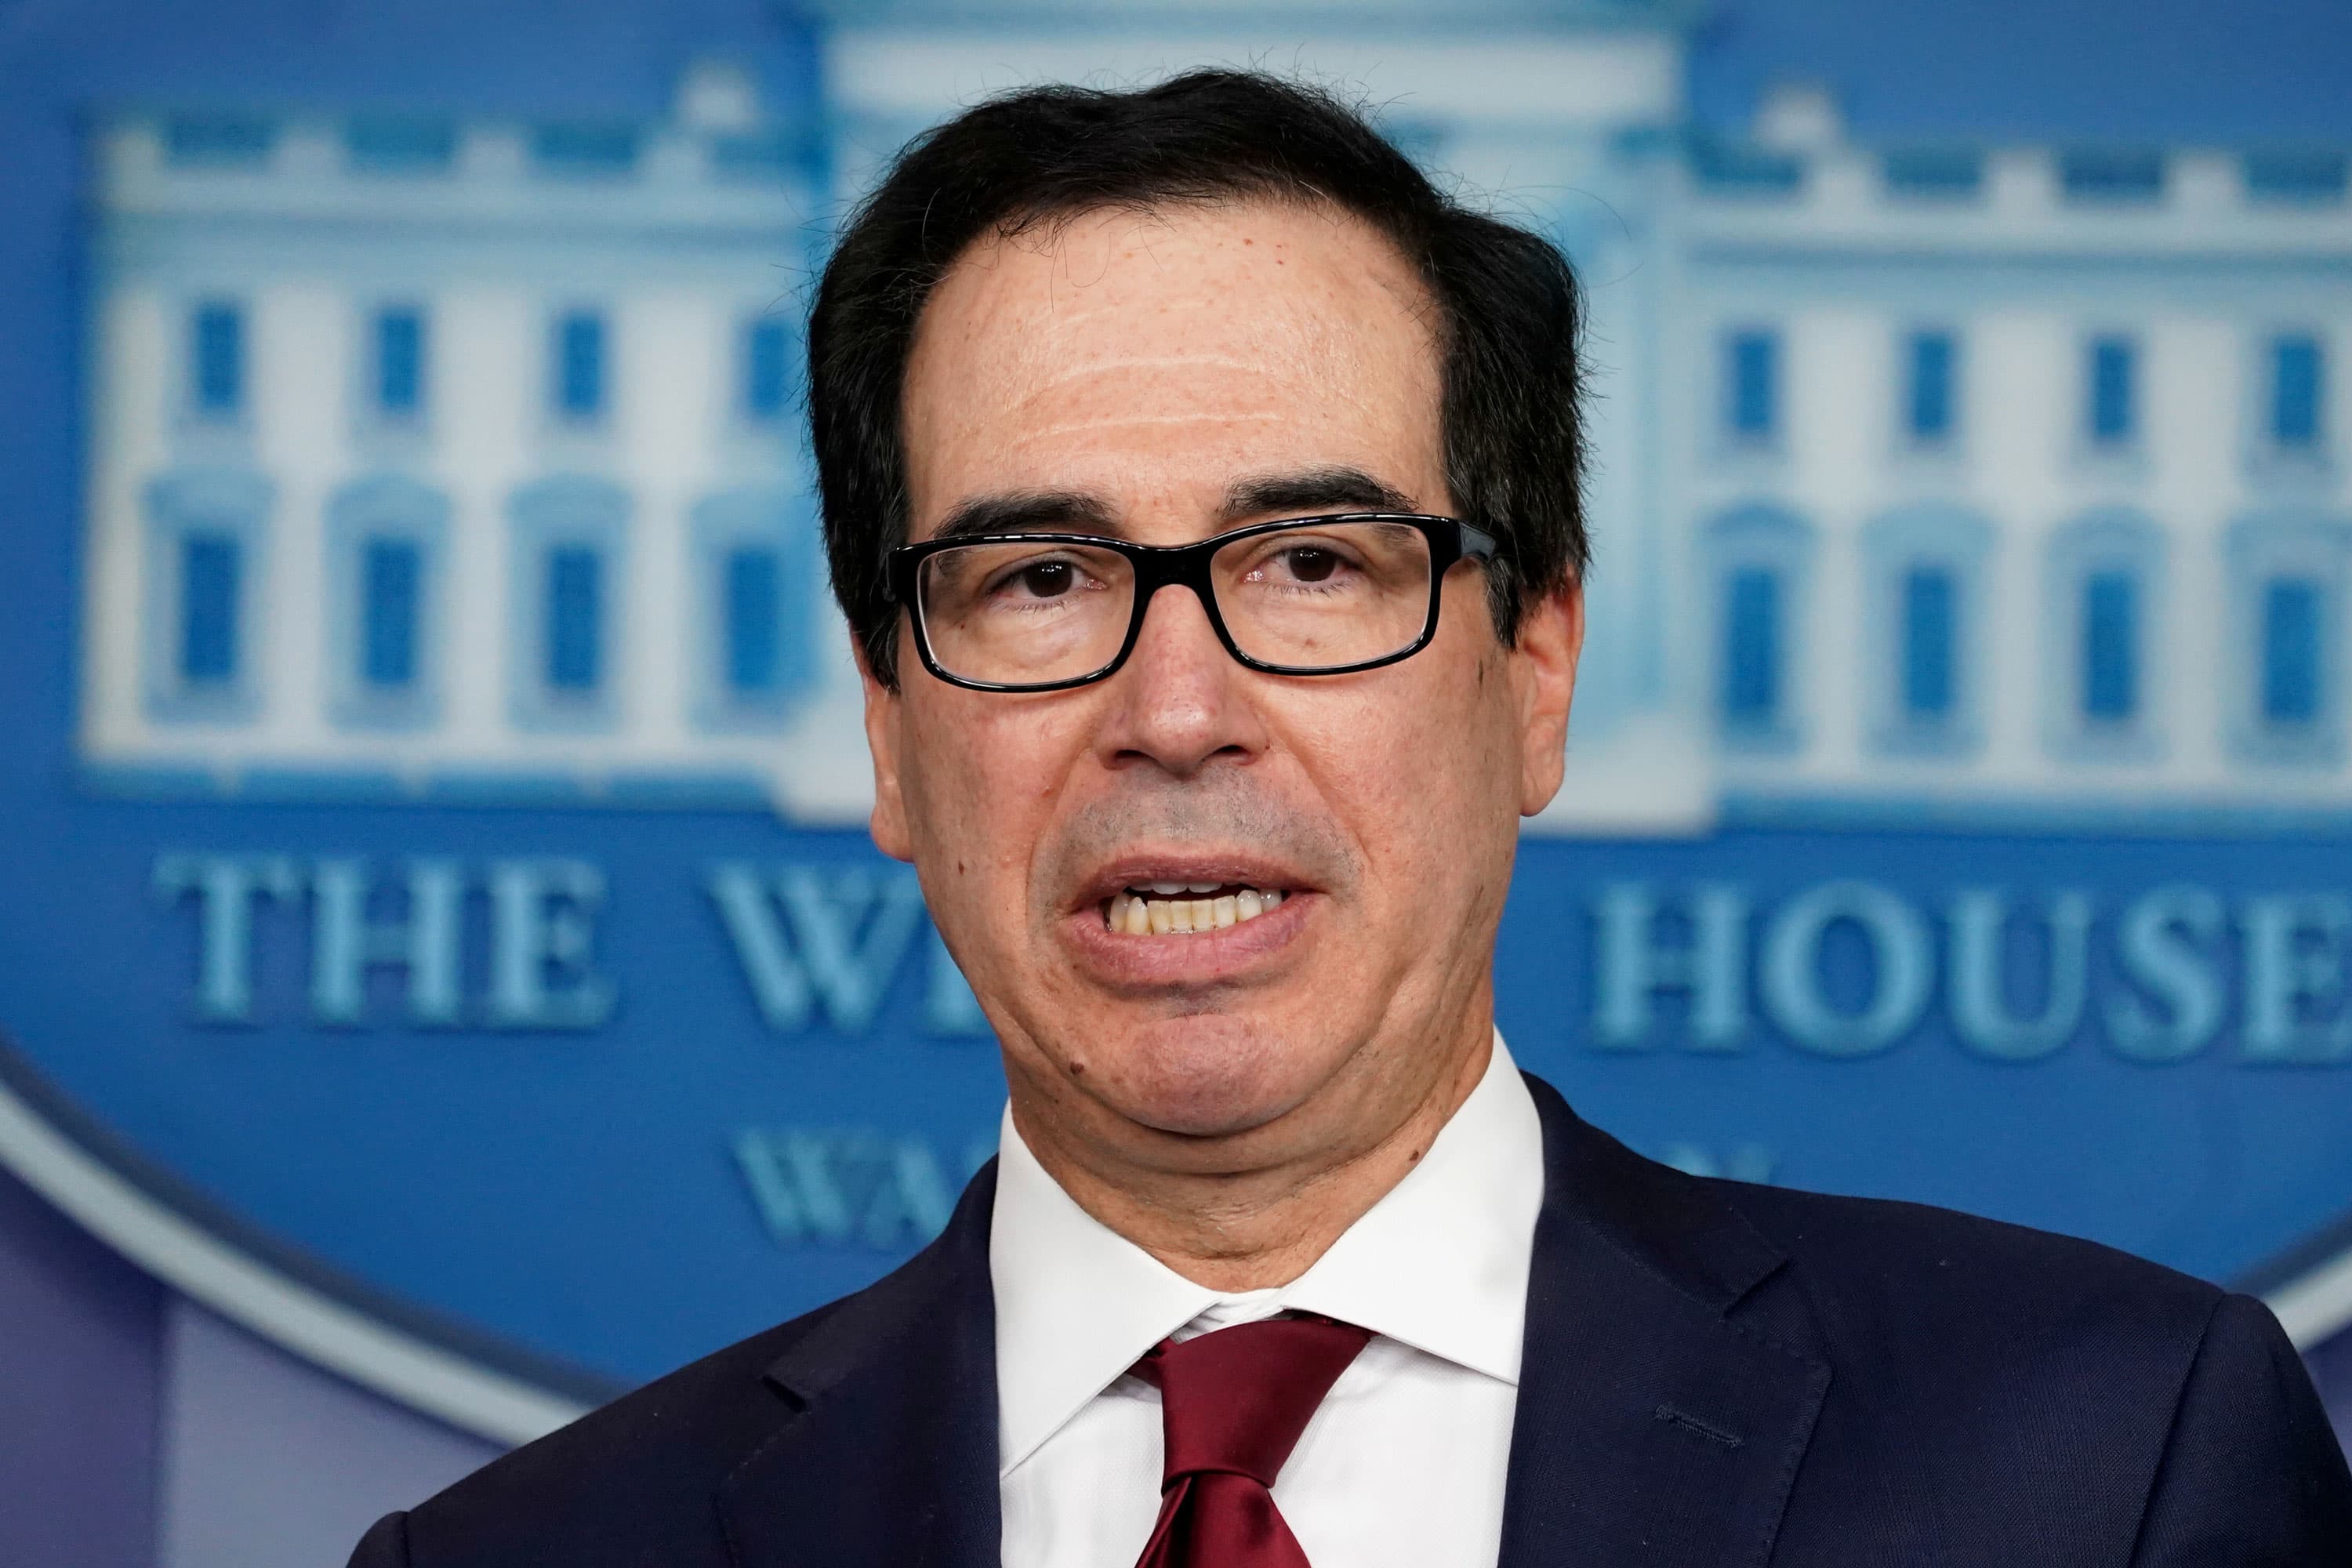 Mnuchin says he will talk to lawmakers about PPP disclosure